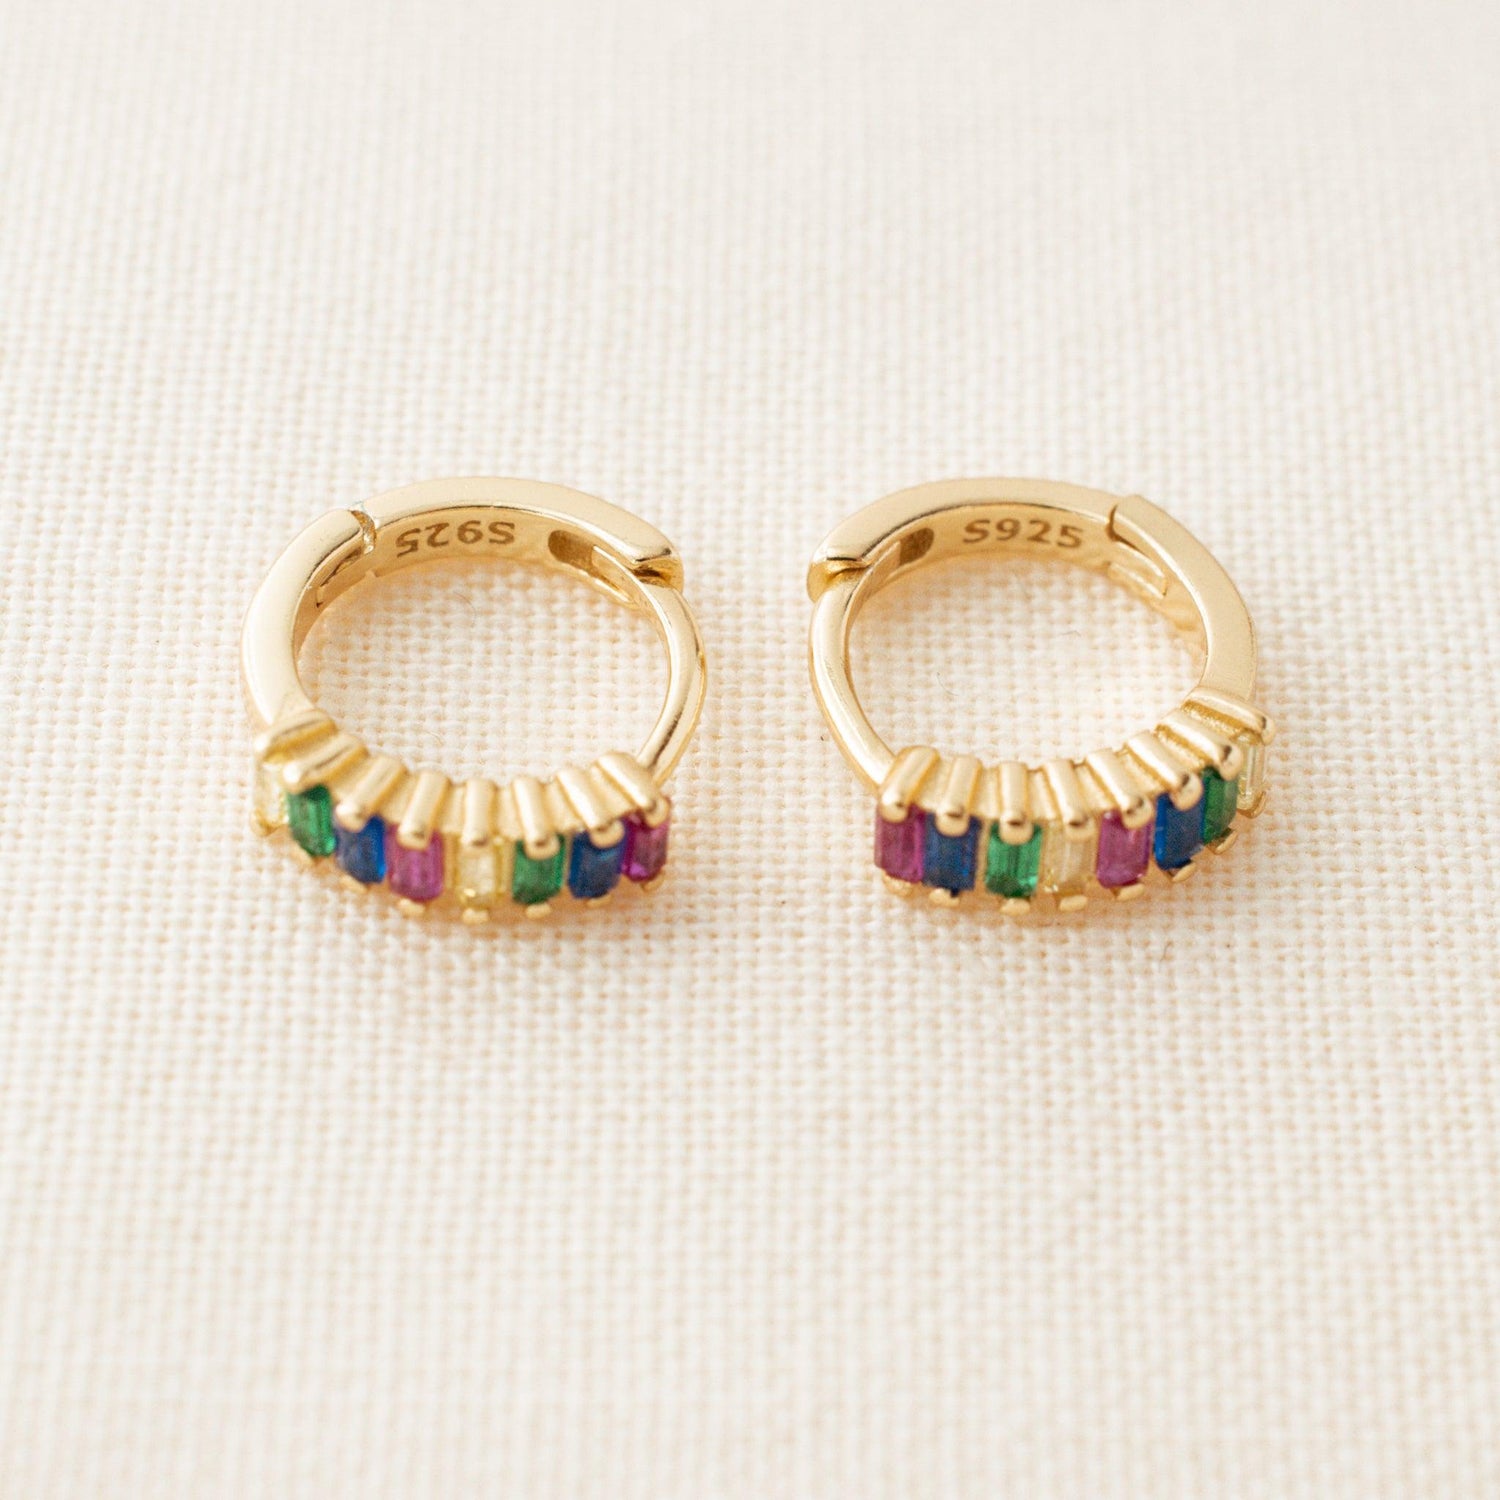 Detail of the Multicolor Crystal Hoop Earrings show crystals in pink, blue, green and yellow colors